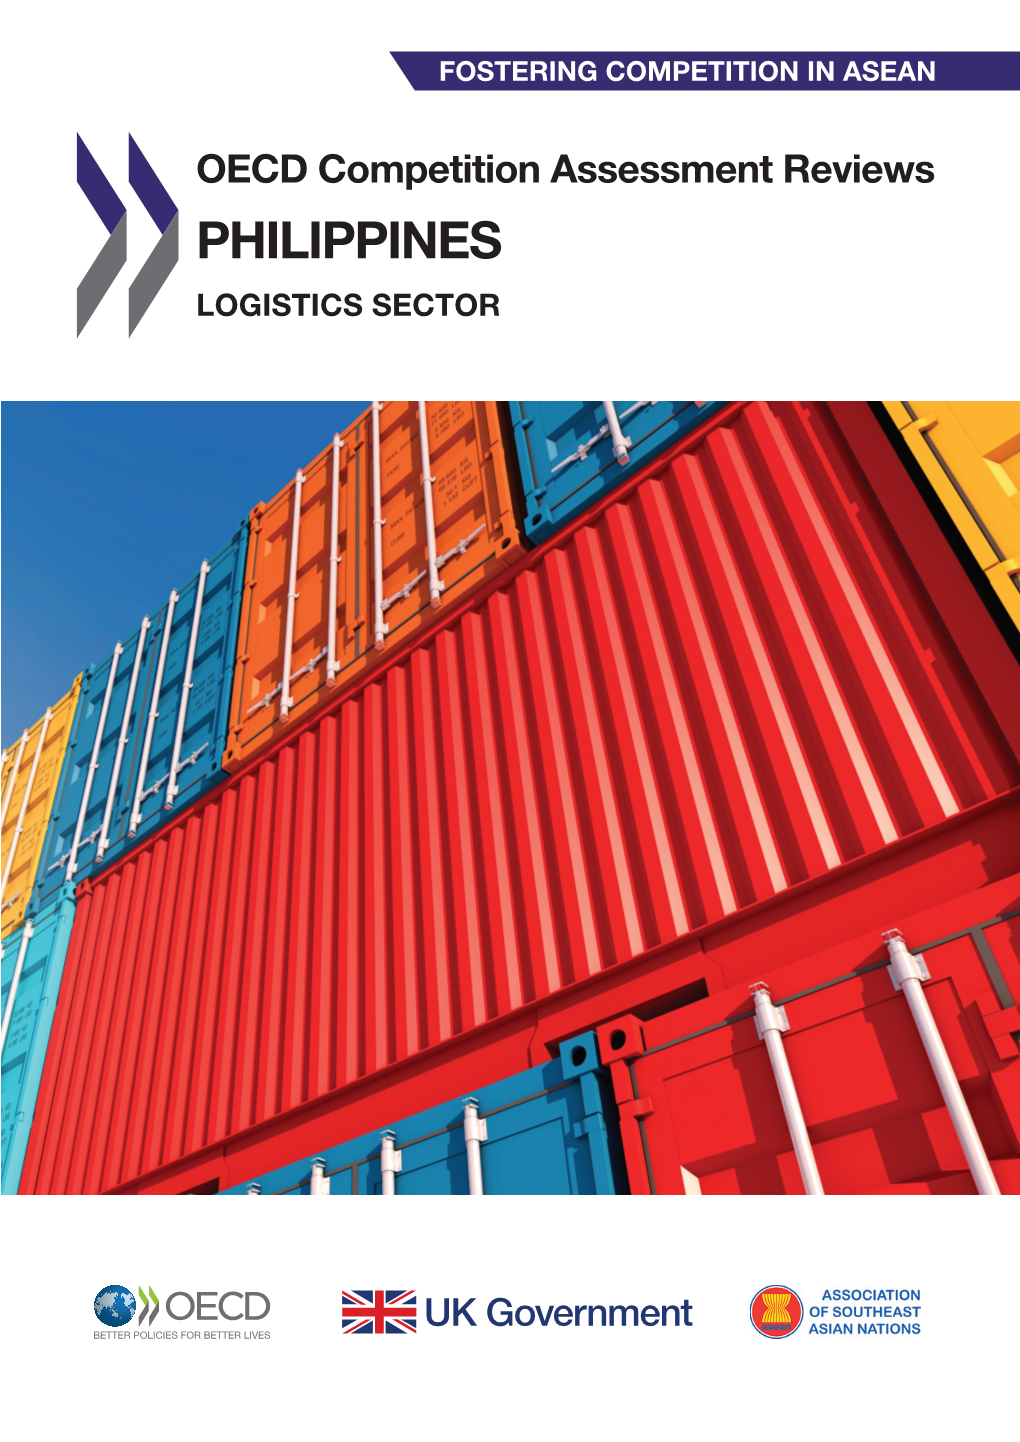 Competition Assessment Reviews: Logistics Sector in the Philippines